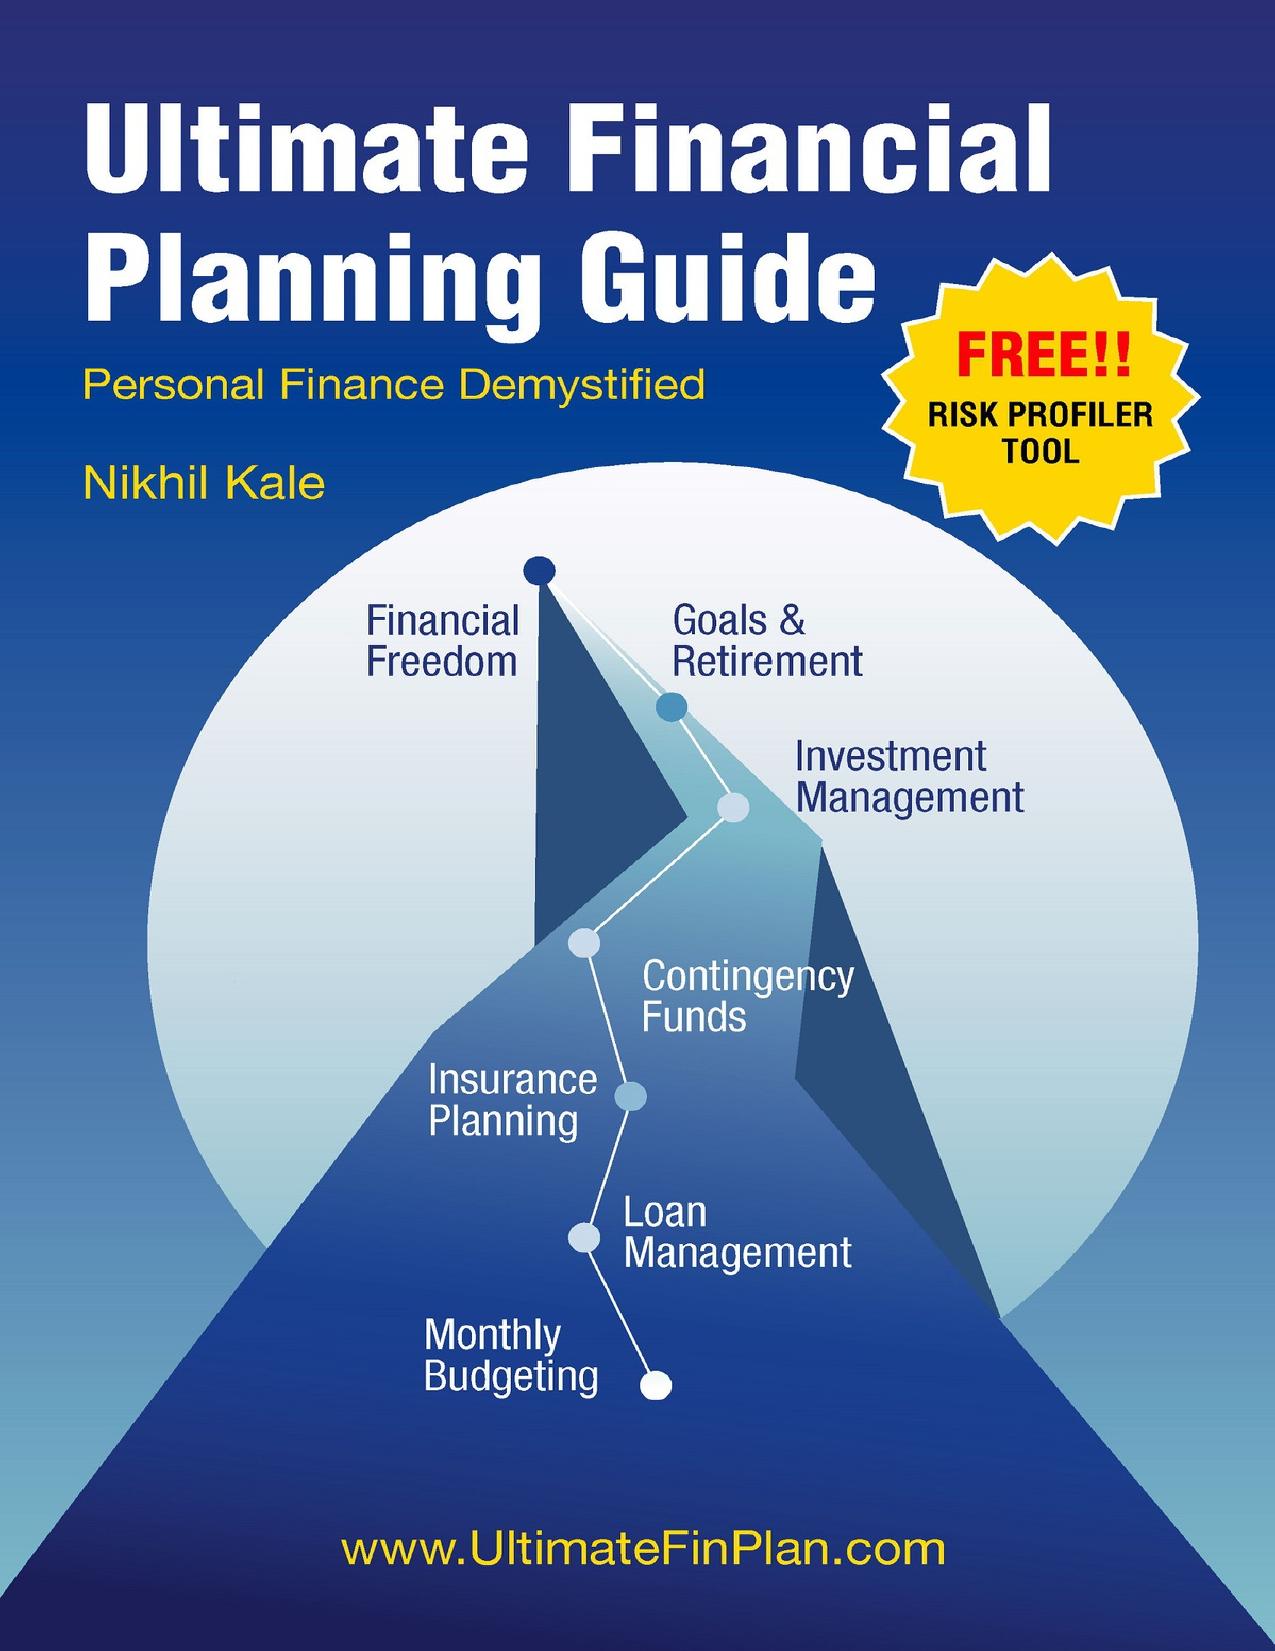 Ultimate Financial Planning Guide: Personal Finance Demystified by KALE NIKHIL